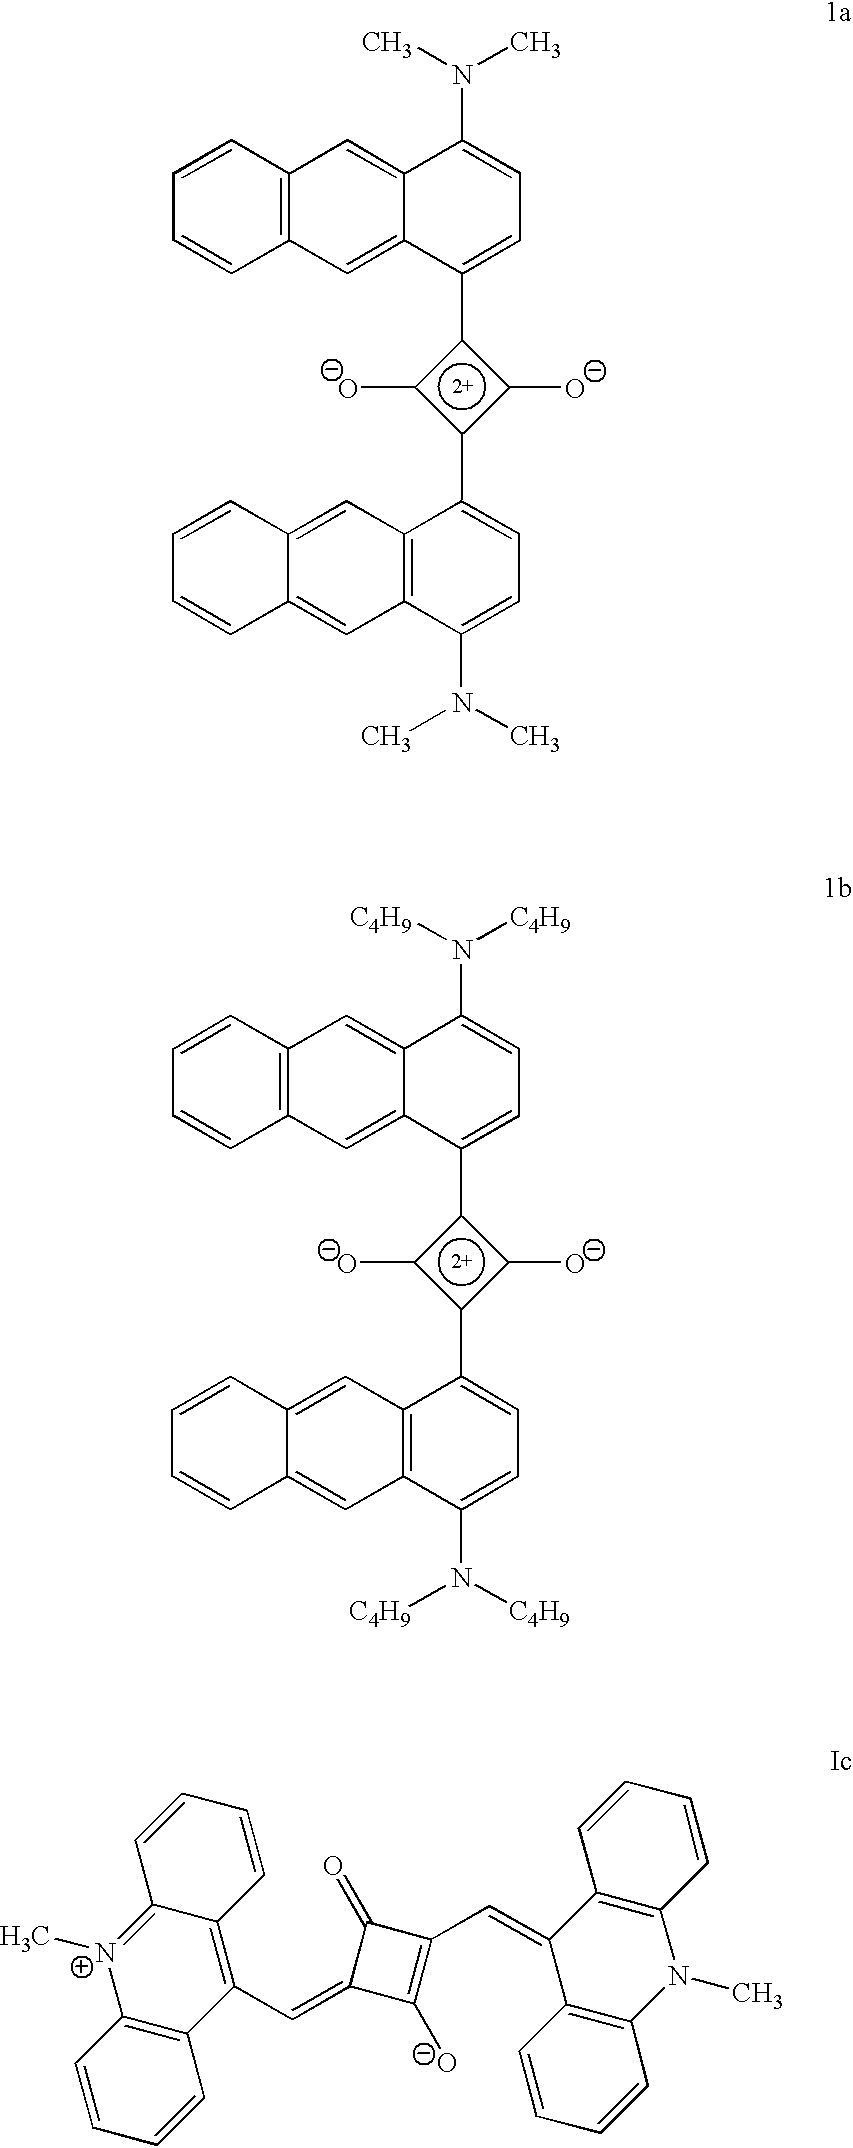 Squaraine based dyes and process for preparation thereof